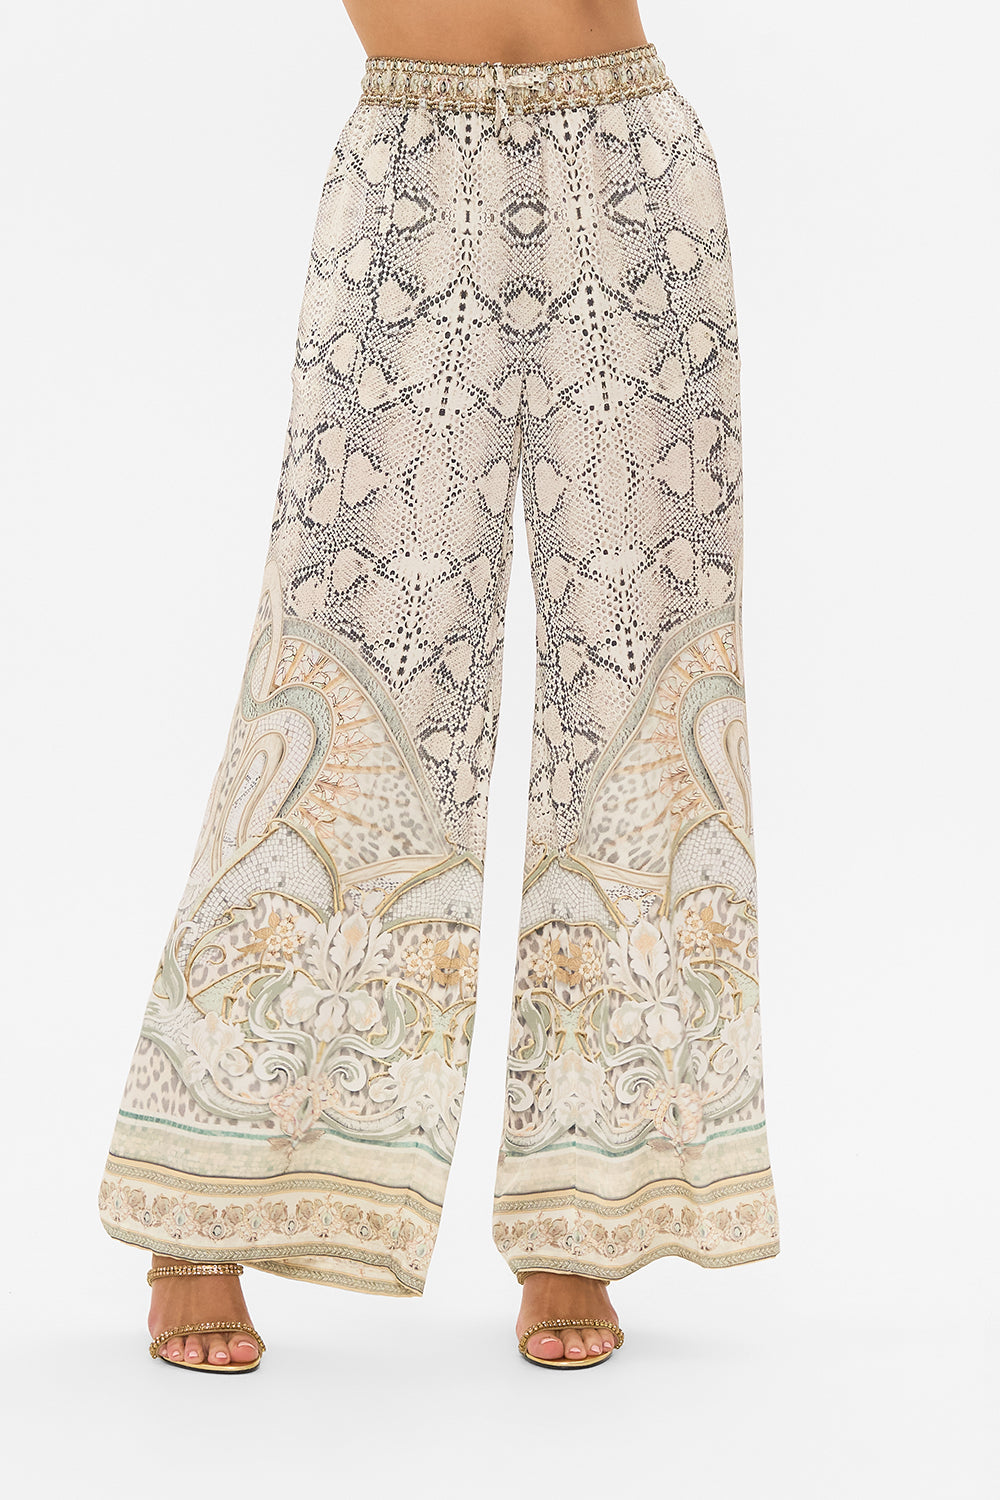 CAMILLA silk pants in Ivory Tower Tales print